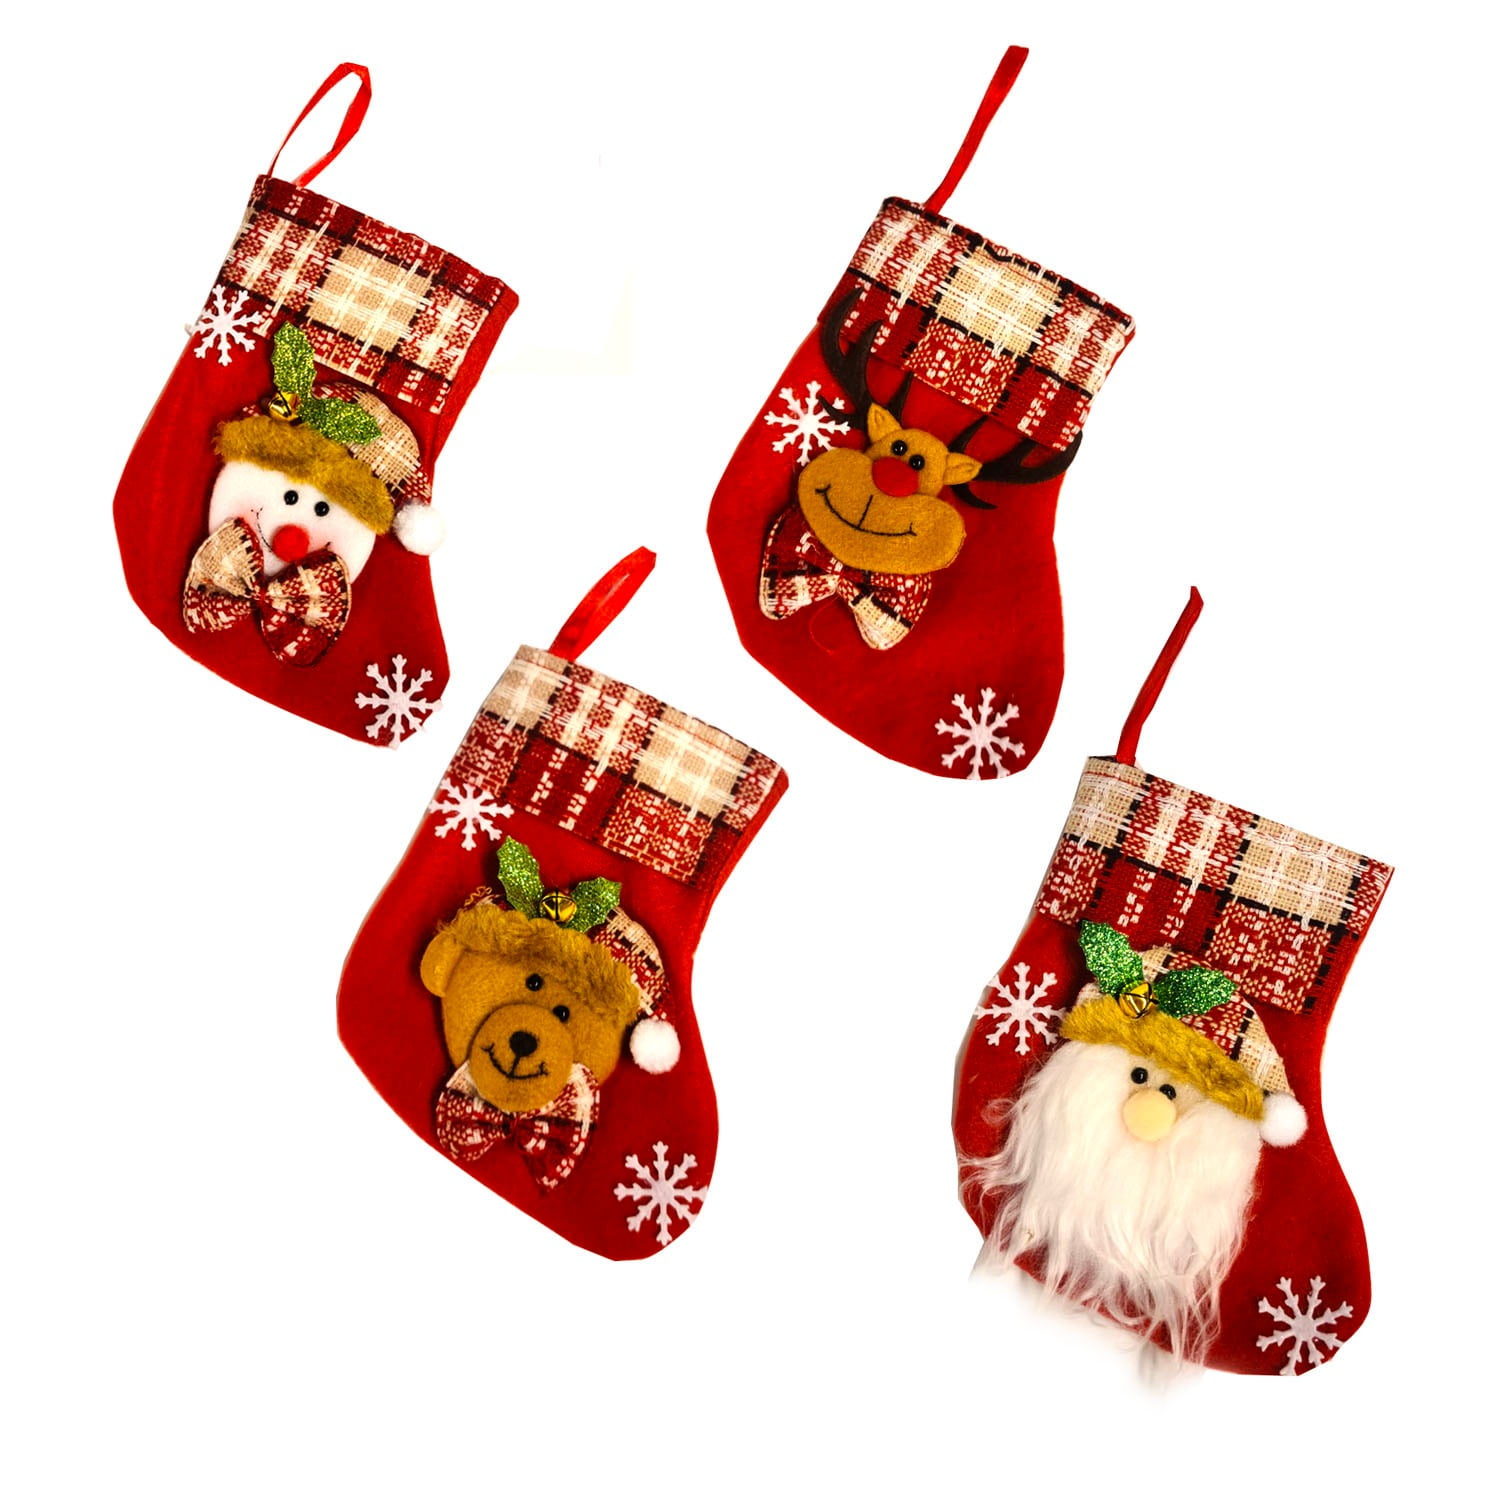 Christmas Stocking 3D Santa Snowman Reindeer Classic Xmas Gift Candy Pouch Bag 